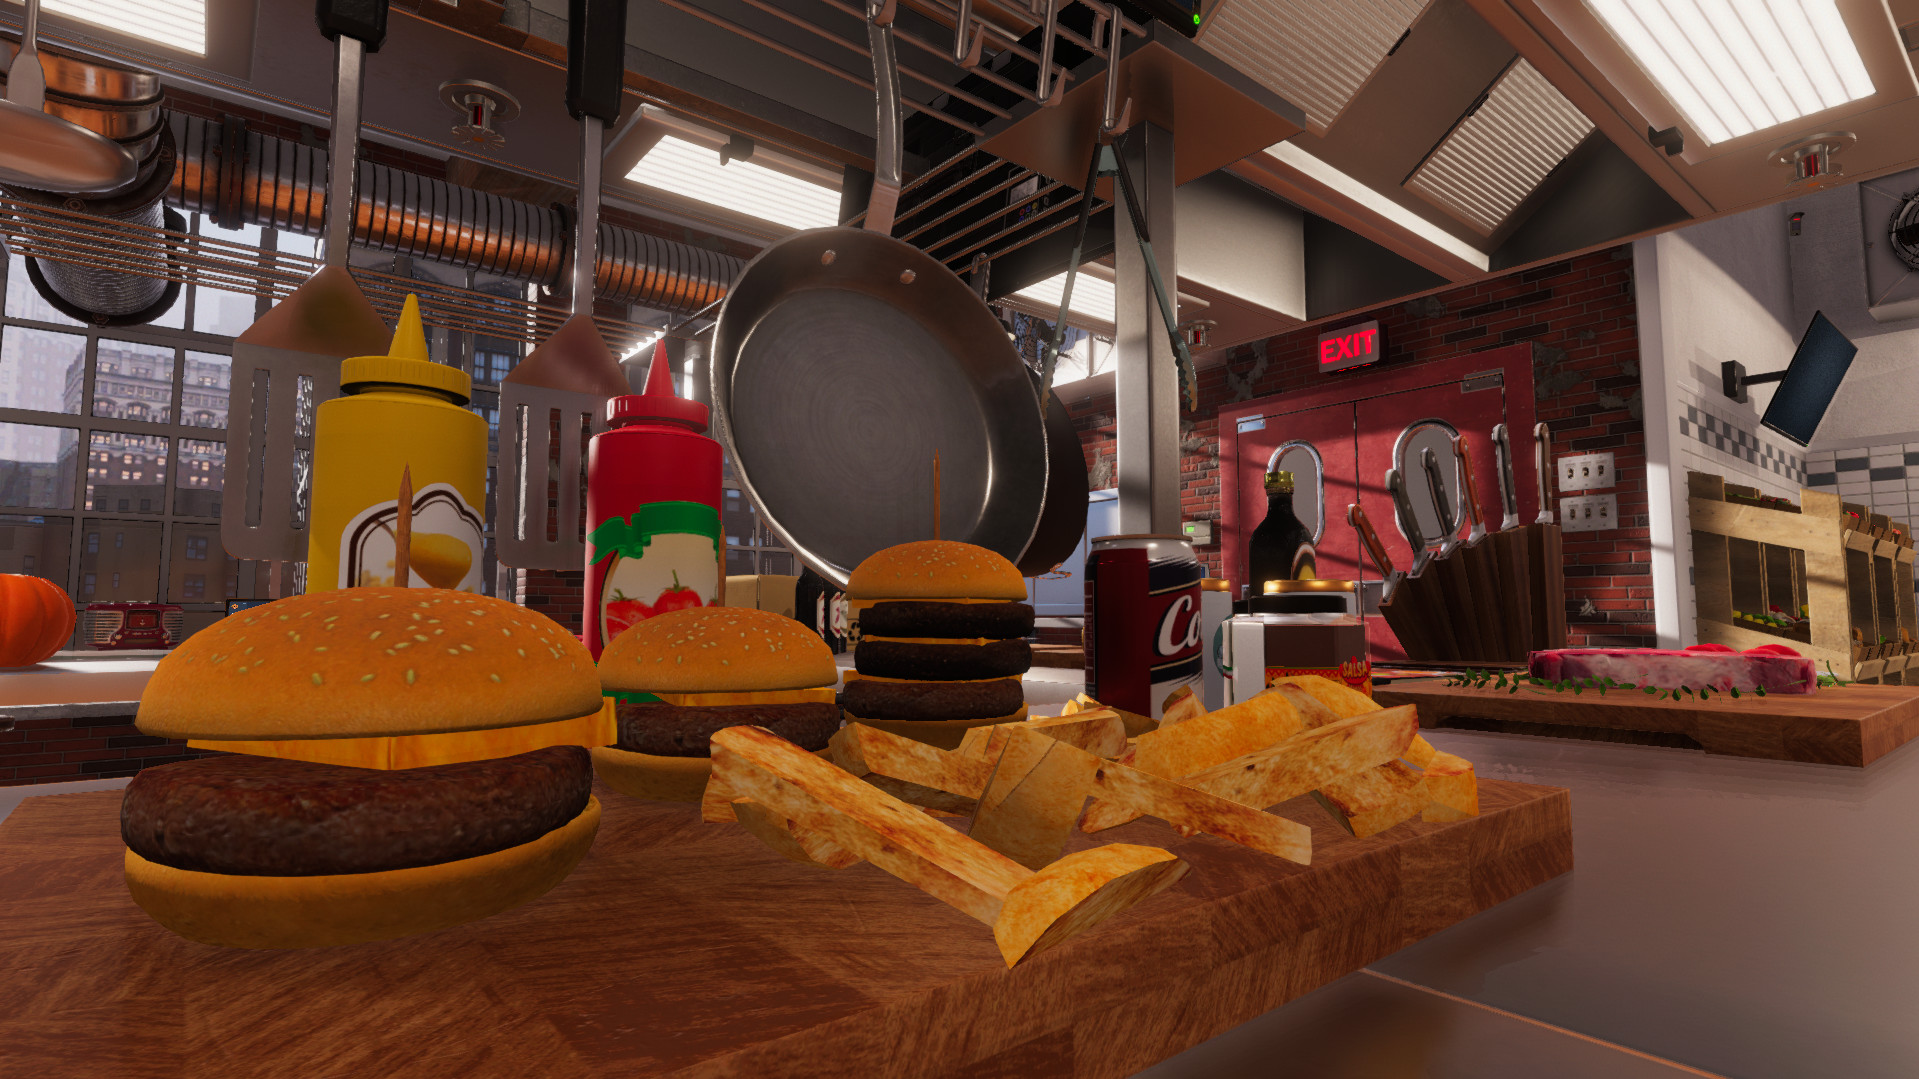 Cooking Simulator Loading Forever